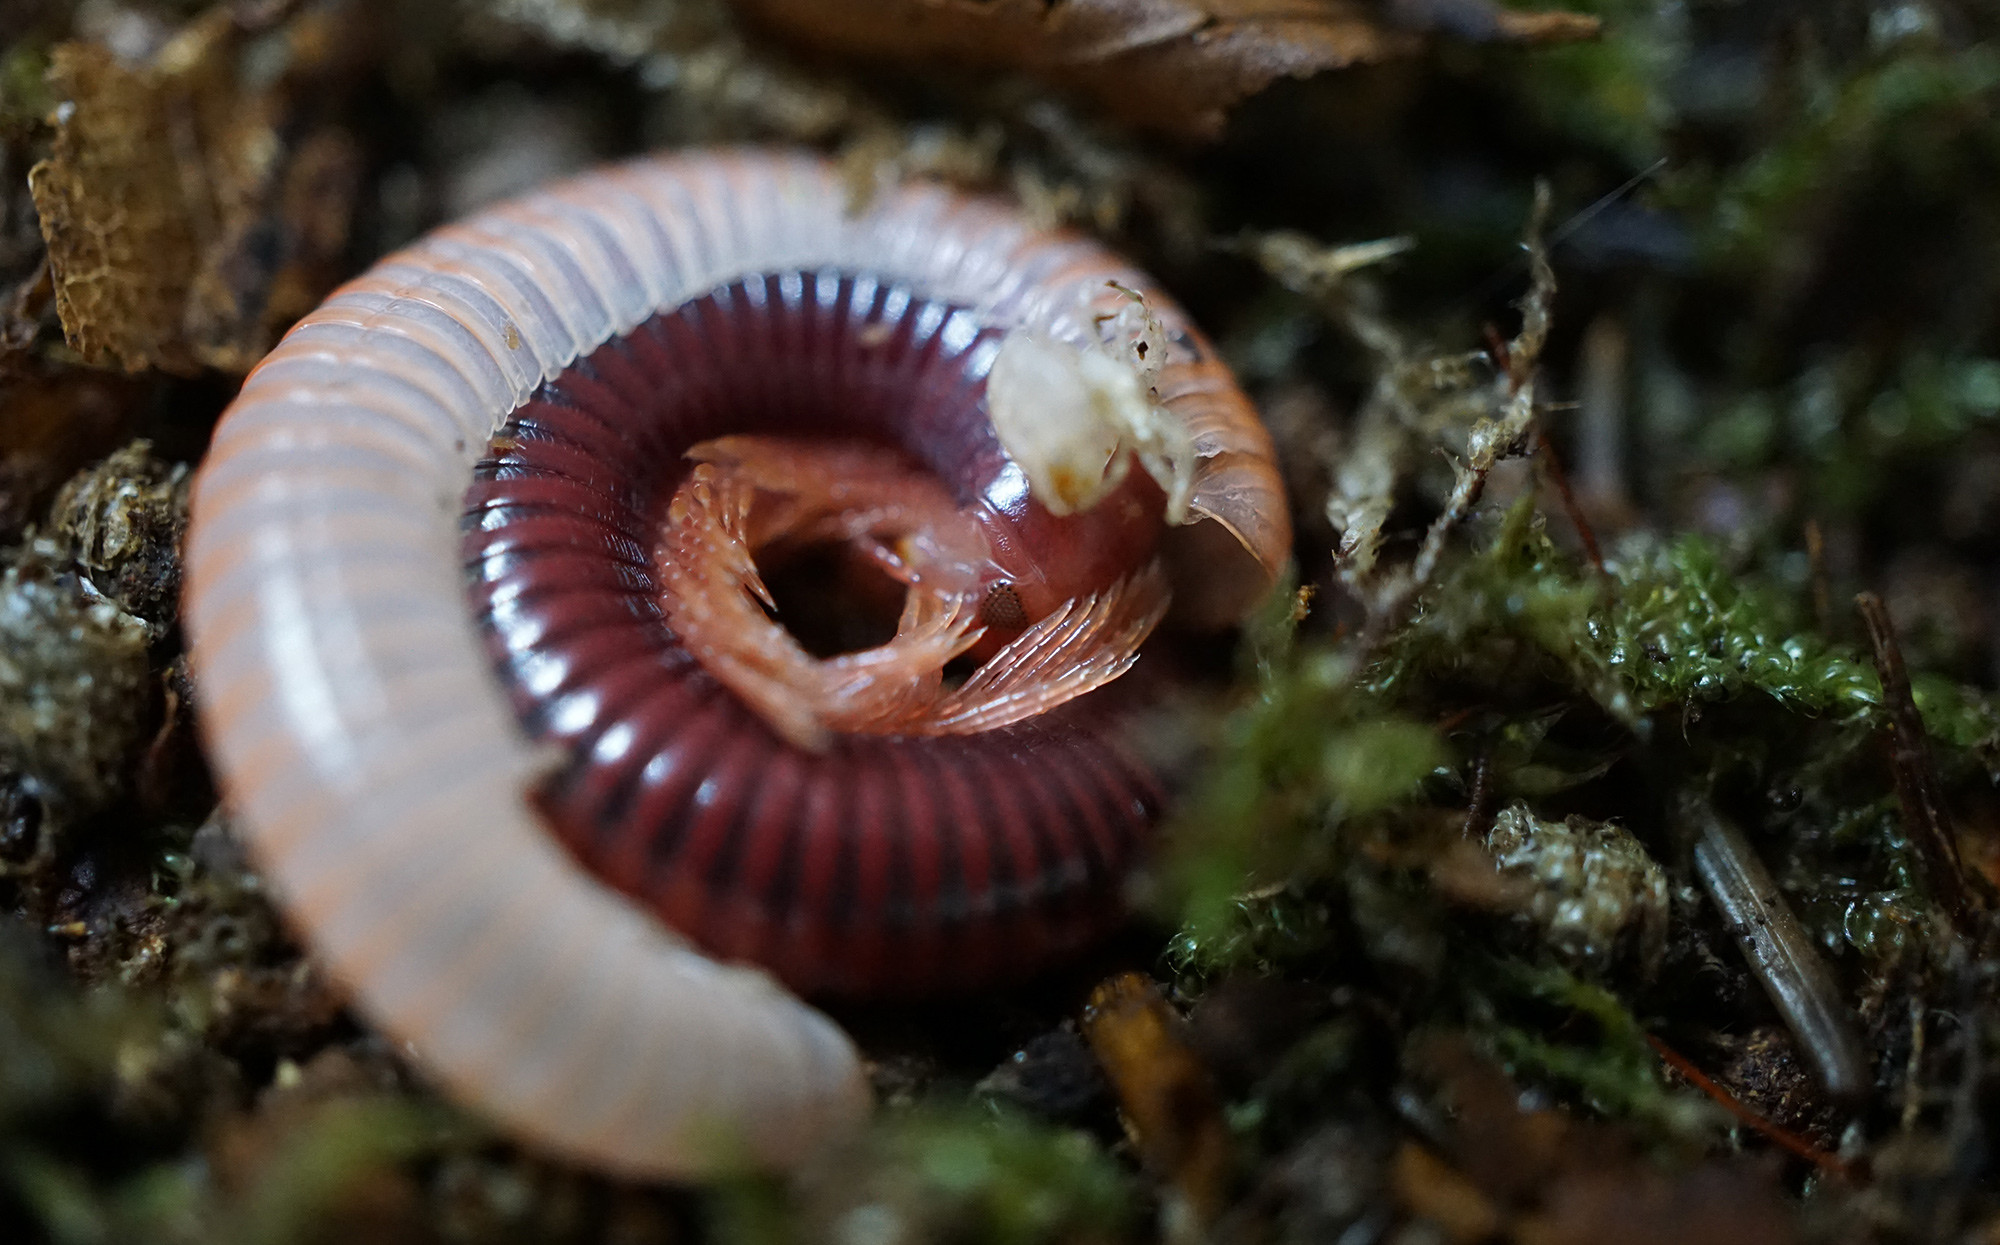 Centrobolus splendidus during an ecdysis.
Ususally, they do this below ground, but it can happen (like here) that they will do this above ground.
During this process, millipedes are extremely vulnerable, as the new exoskeleton is still very soft.